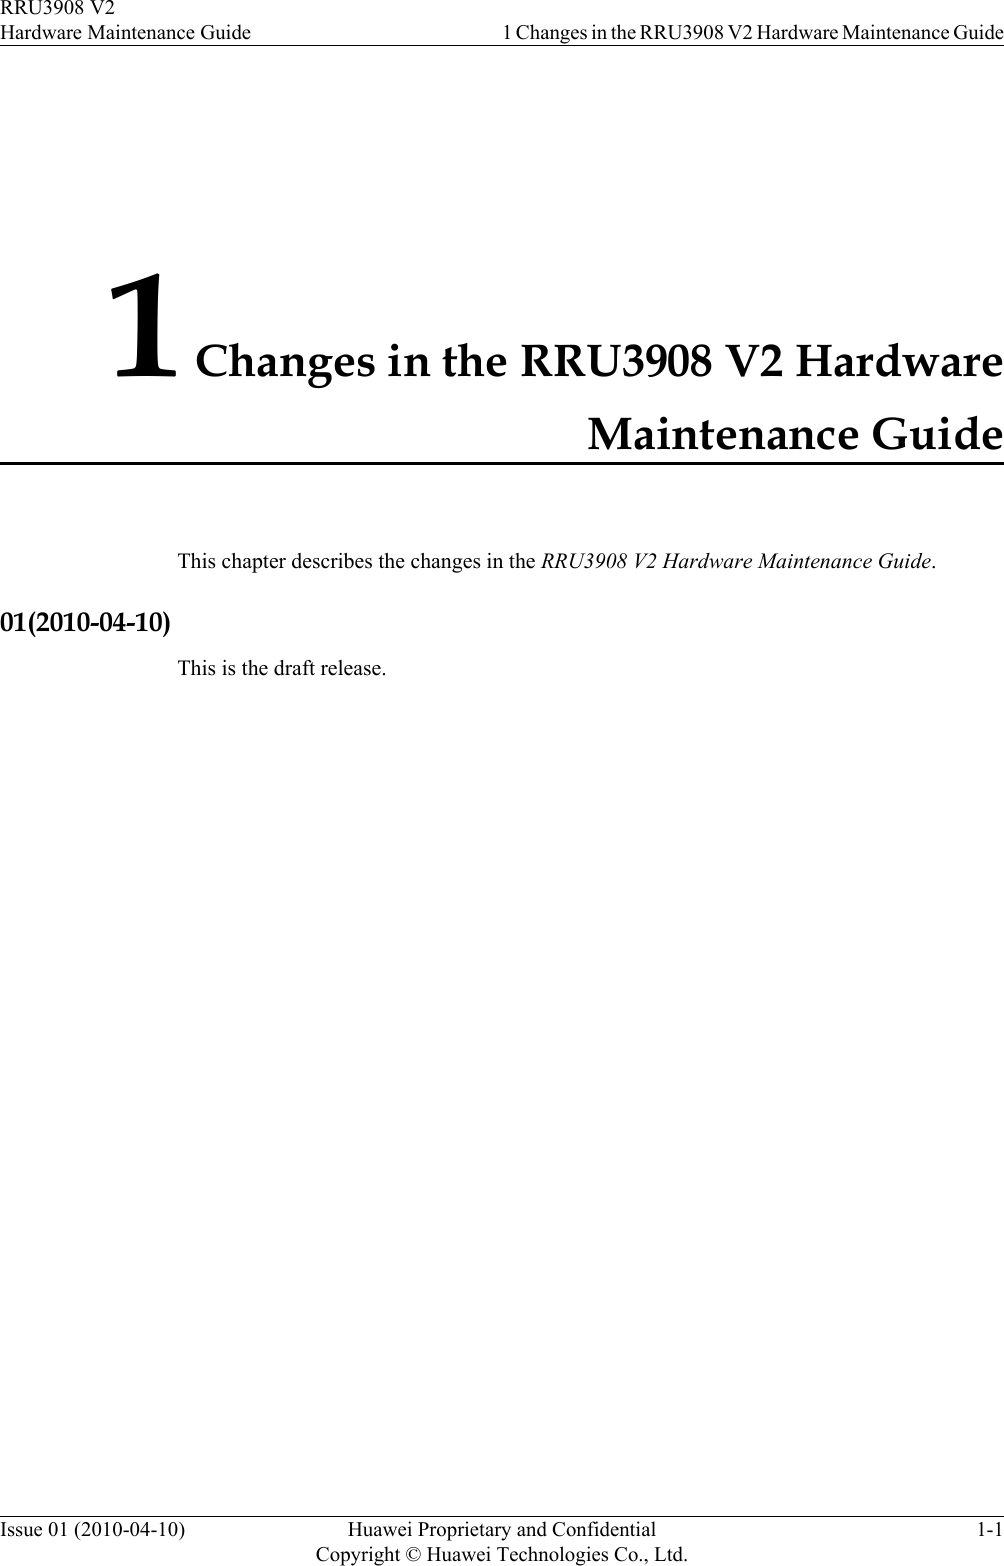 1 Changes in the RRU3908 V2 HardwareMaintenance GuideThis chapter describes the changes in the RRU3908 V2 Hardware Maintenance Guide.01(2010-04-10)This is the draft release.RRU3908 V2Hardware Maintenance Guide 1 Changes in the RRU3908 V2 Hardware Maintenance GuideIssue 01 (2010-04-10) Huawei Proprietary and ConfidentialCopyright © Huawei Technologies Co., Ltd.1-1